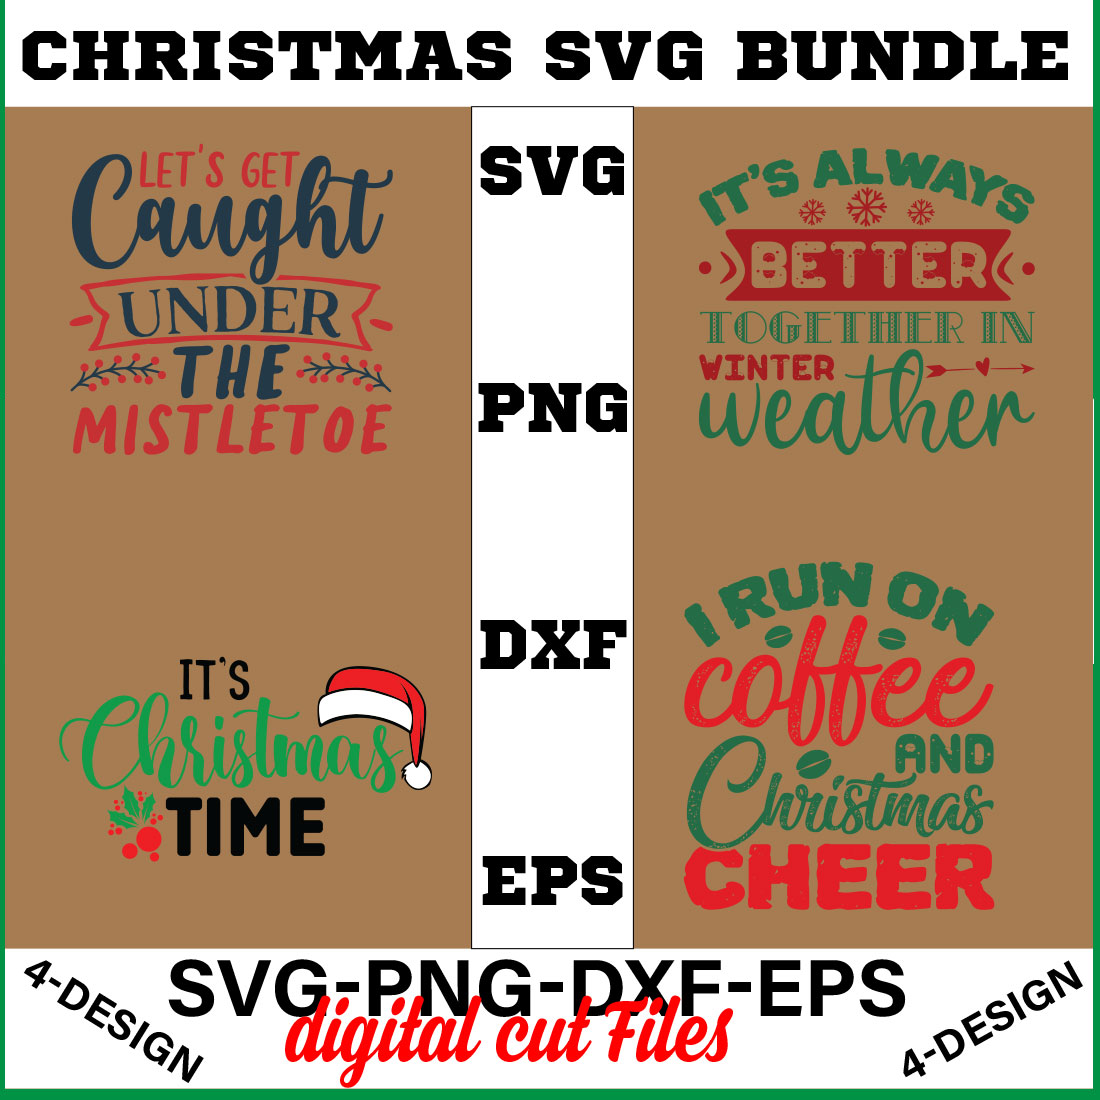 Christmas SVG Bundle Funny Christmas SVG Cut File Cricut Clip art Commercial Use Holiday SVG Christmas Sayings Quotes Winter Volume-27 cover image.